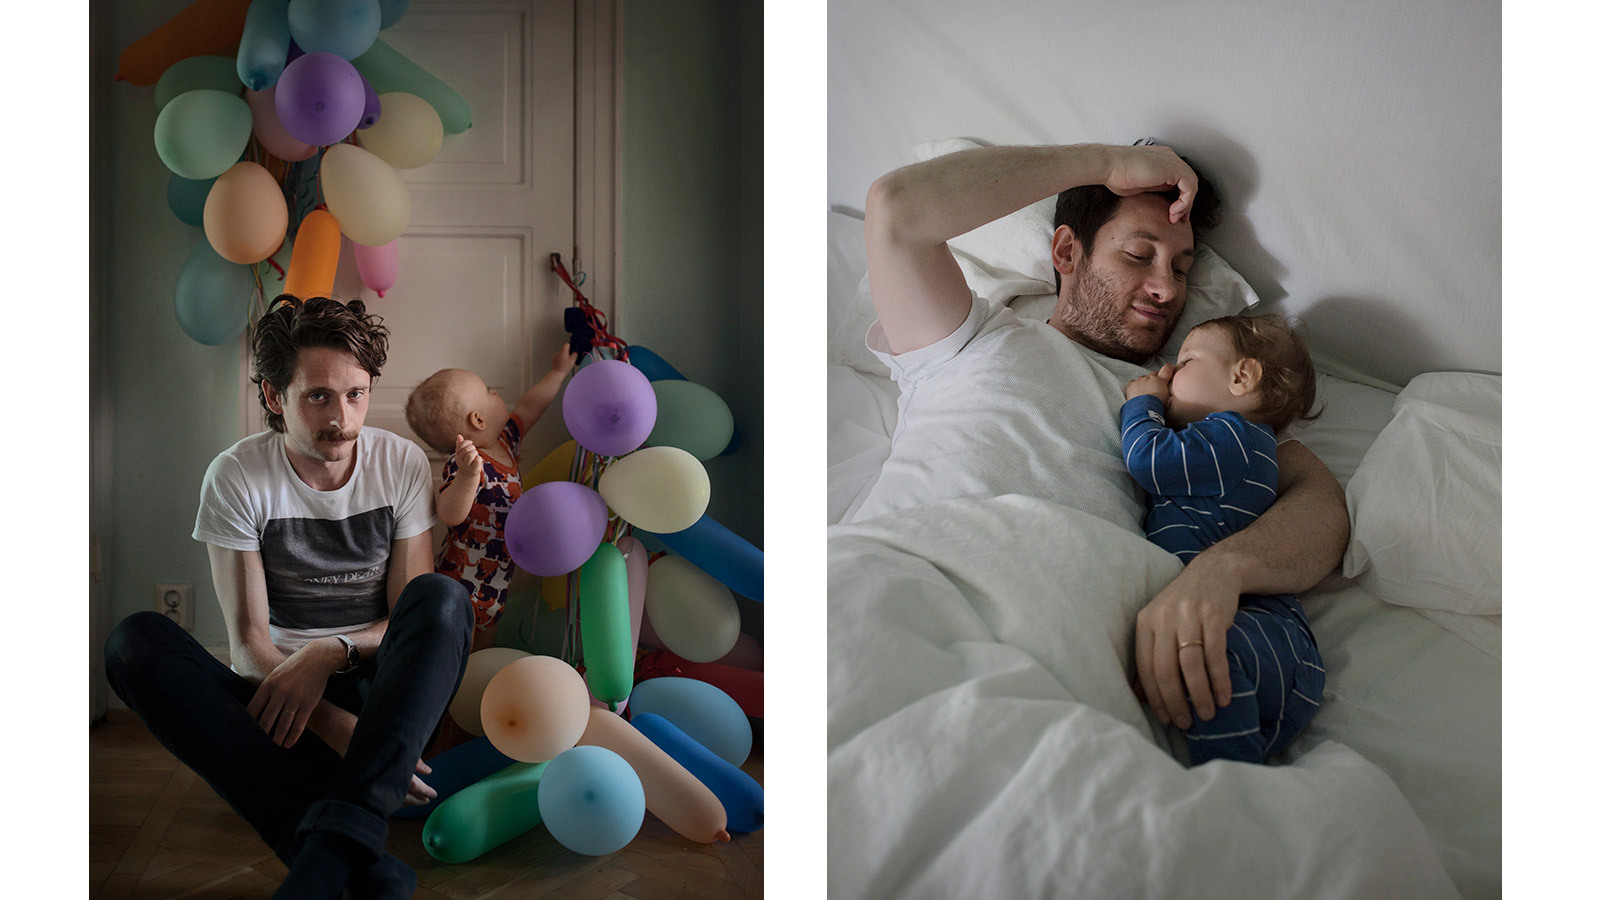 Images from the Swedish Dads Exhibition